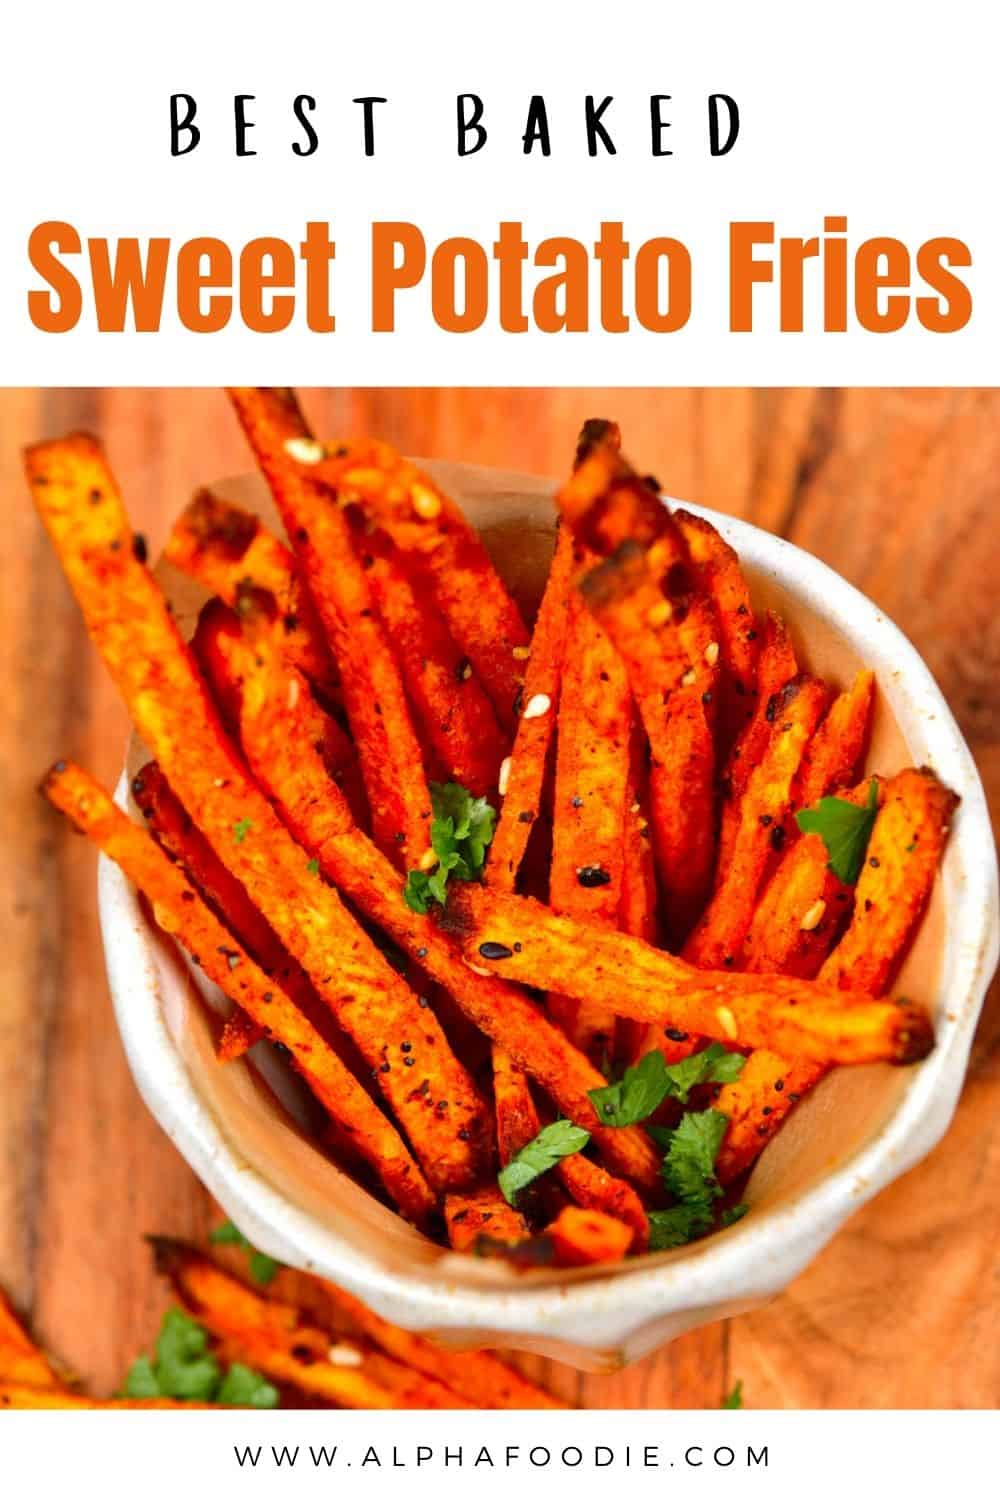 How To Make Sweet Potato Fries (In The Oven) - Alphafoodie